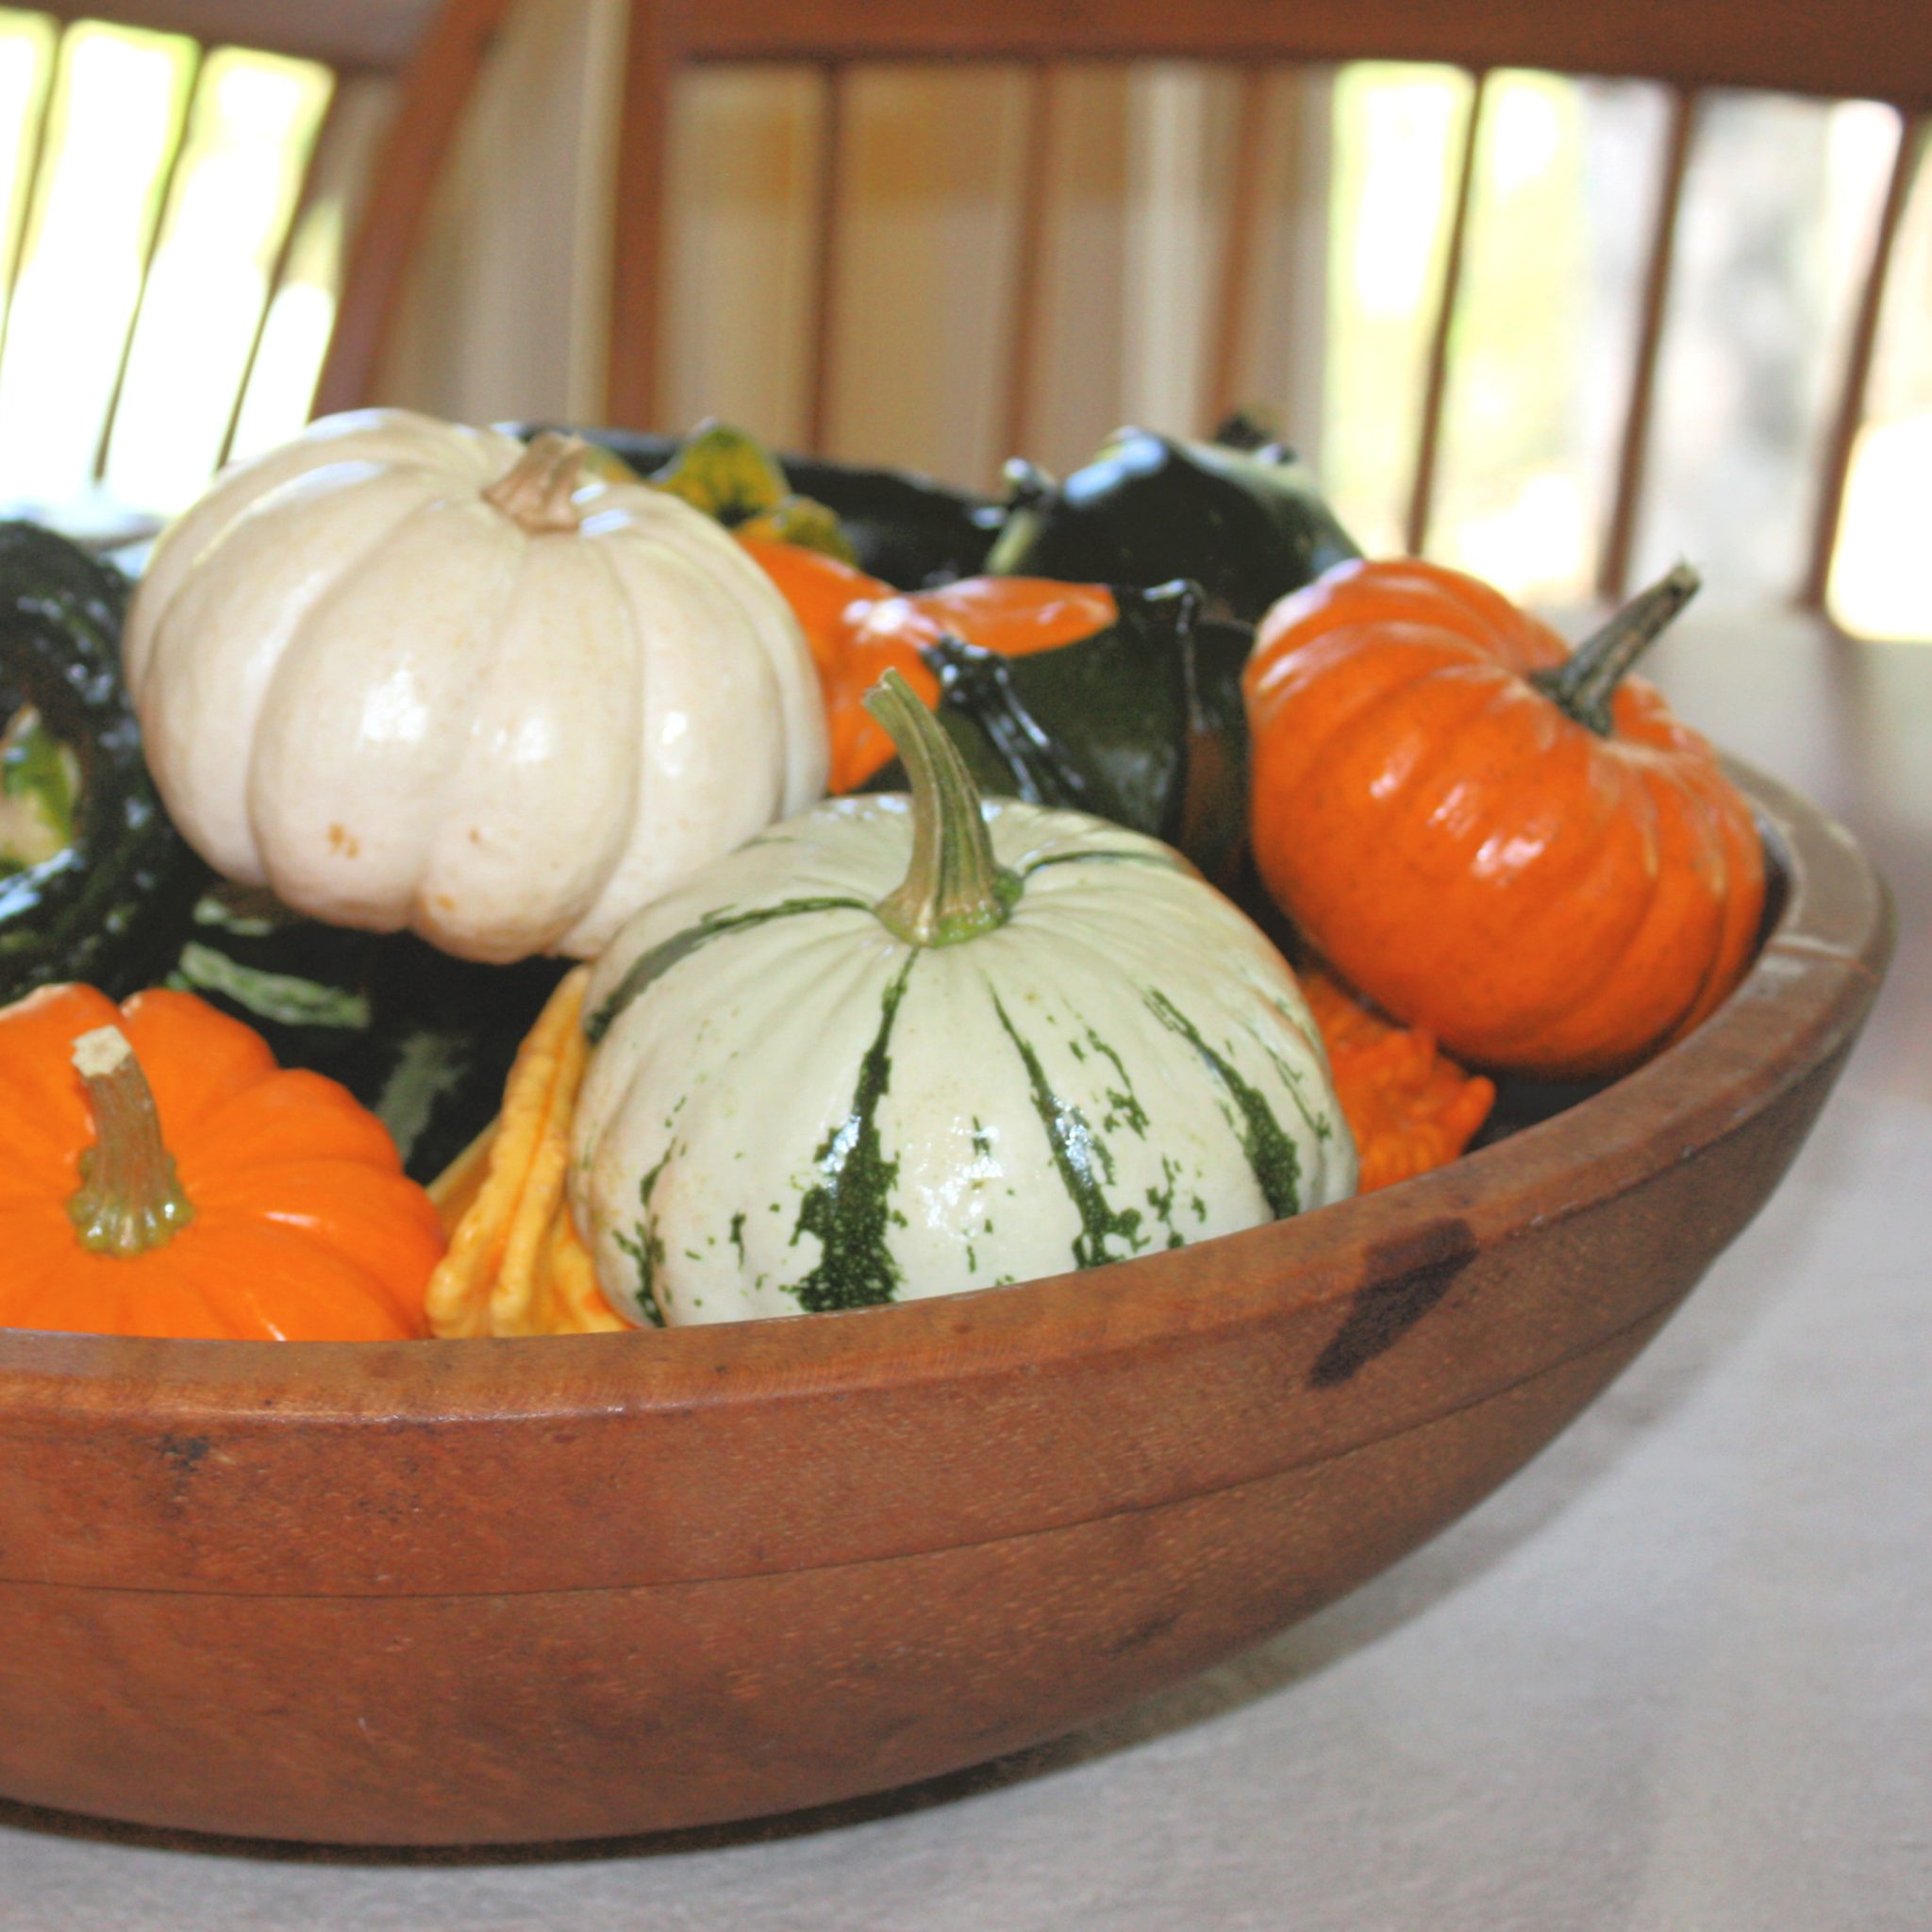 How to Make Pumpkins and Gourds Shine for Display